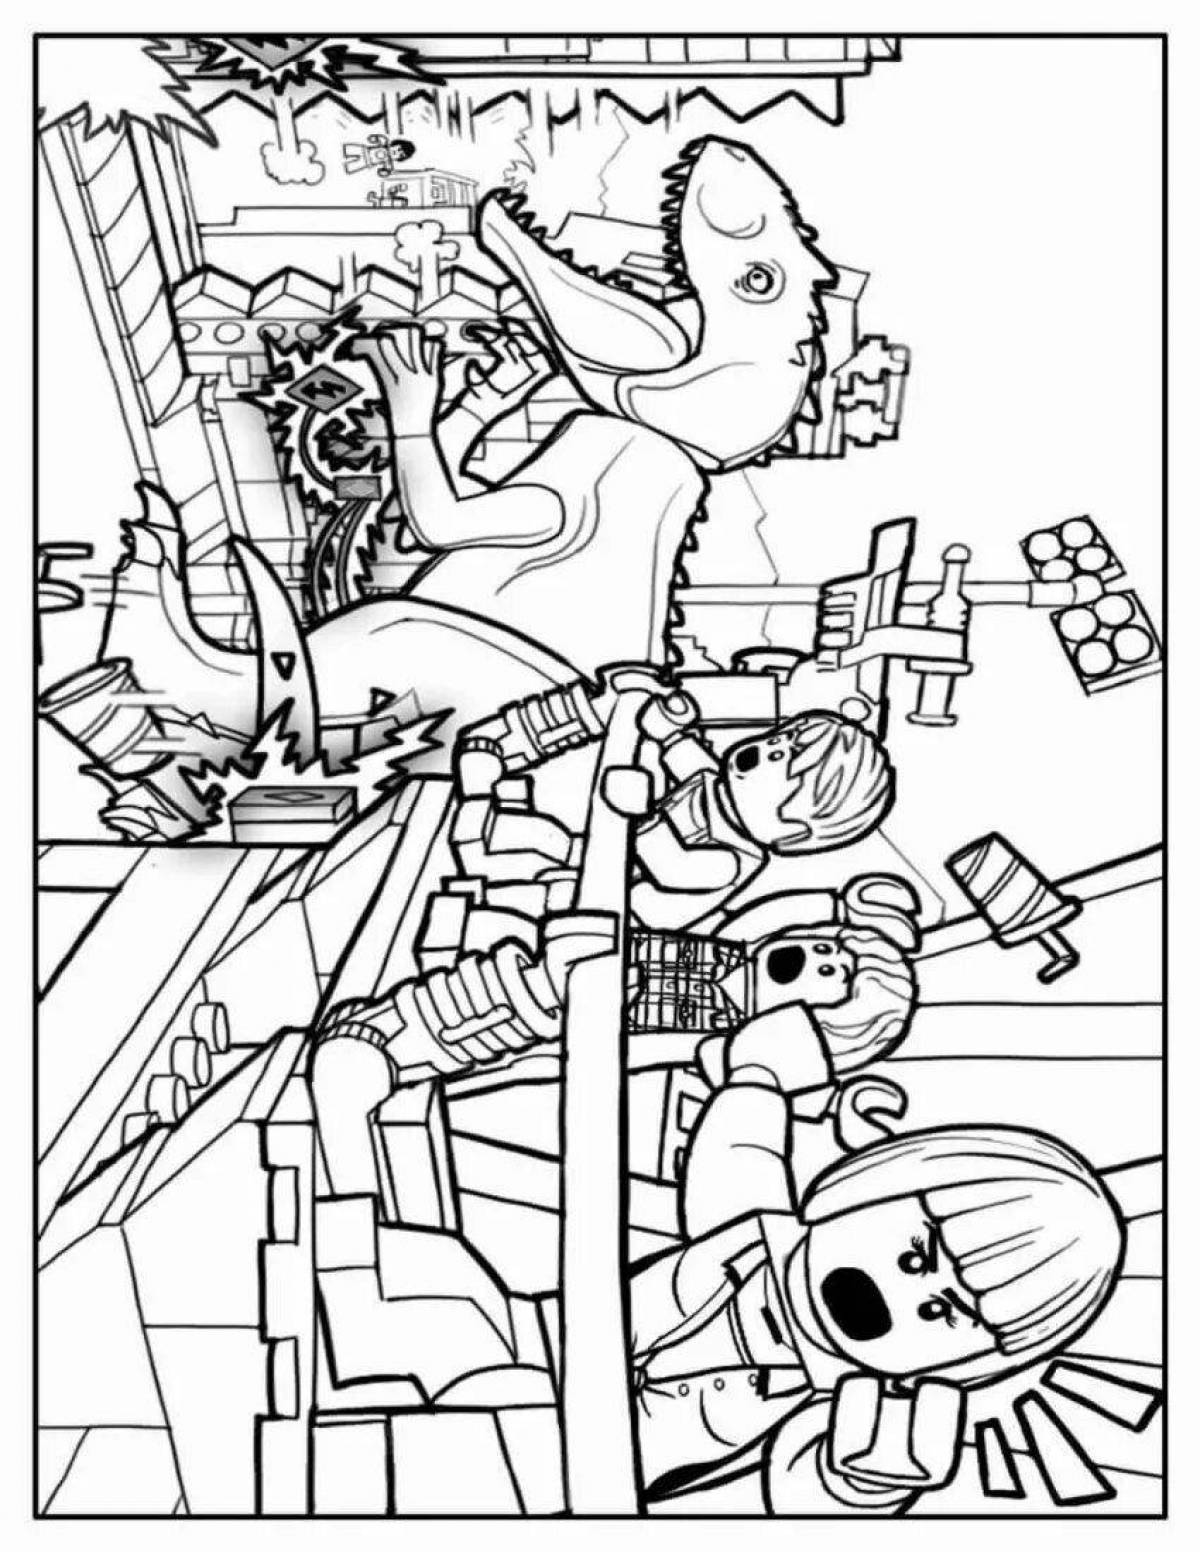 Colorful lego dinosaurs jurassic world coloring page